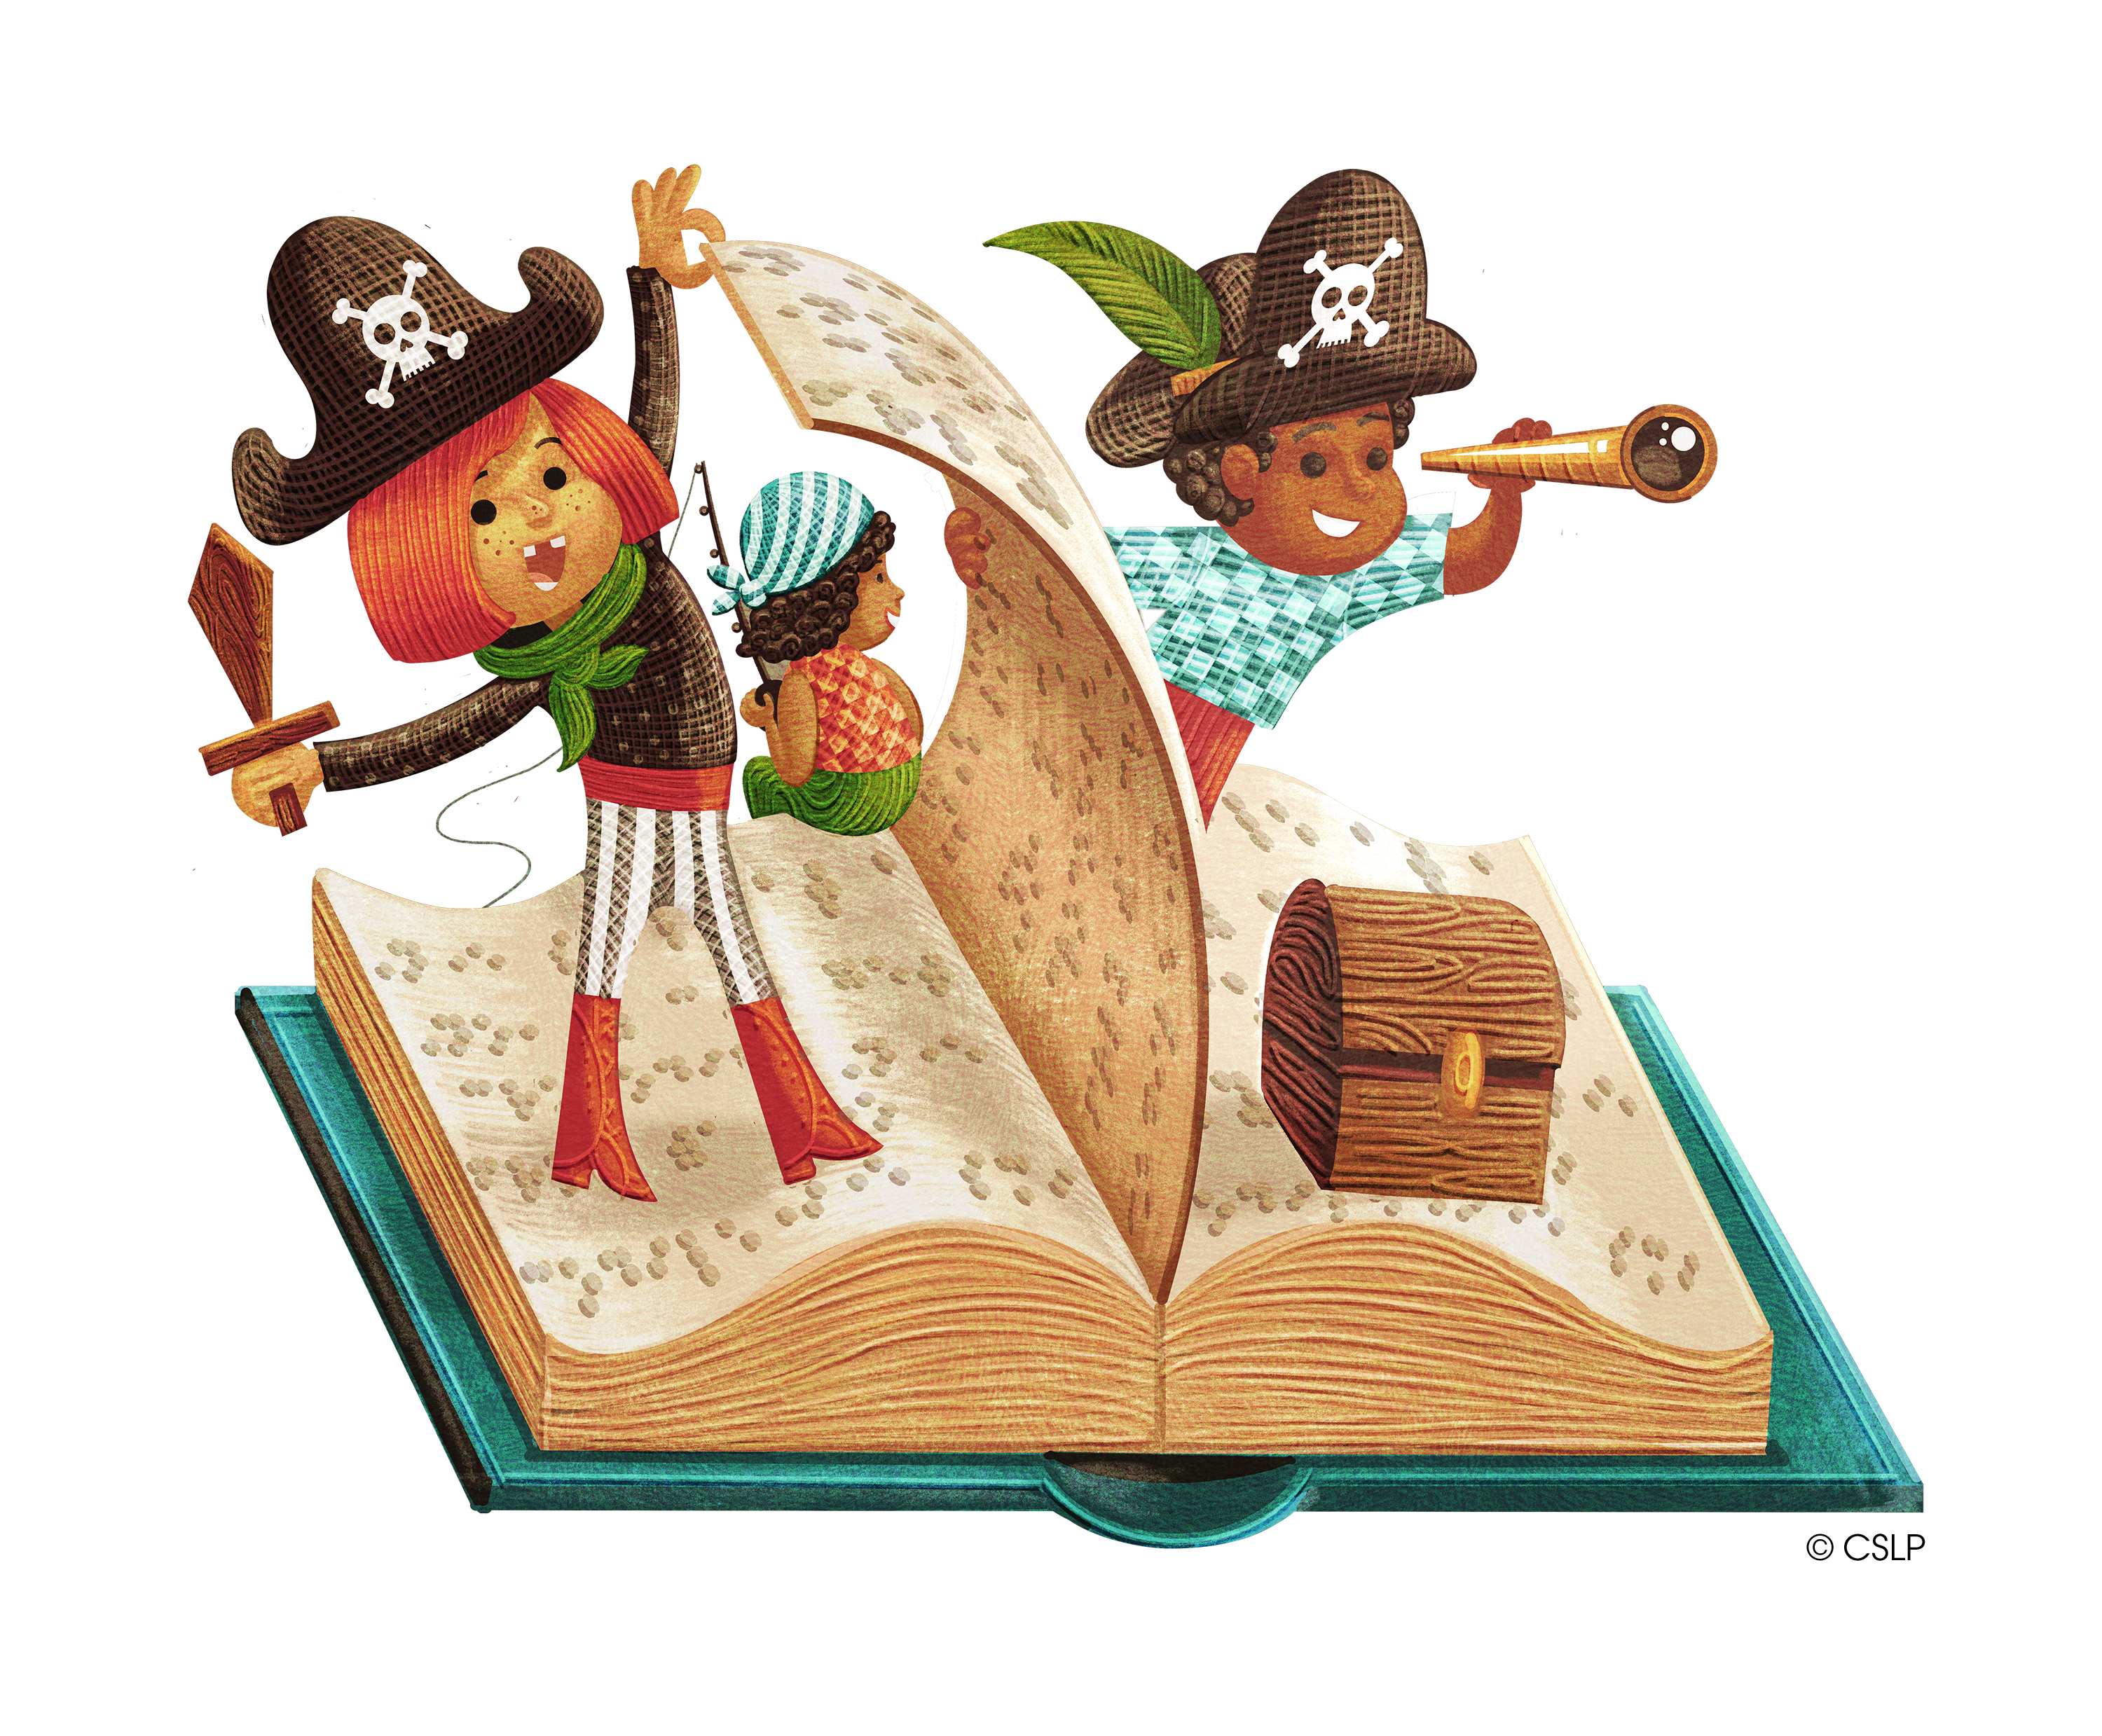 Kids dressed as pirates exploring the pages of a book